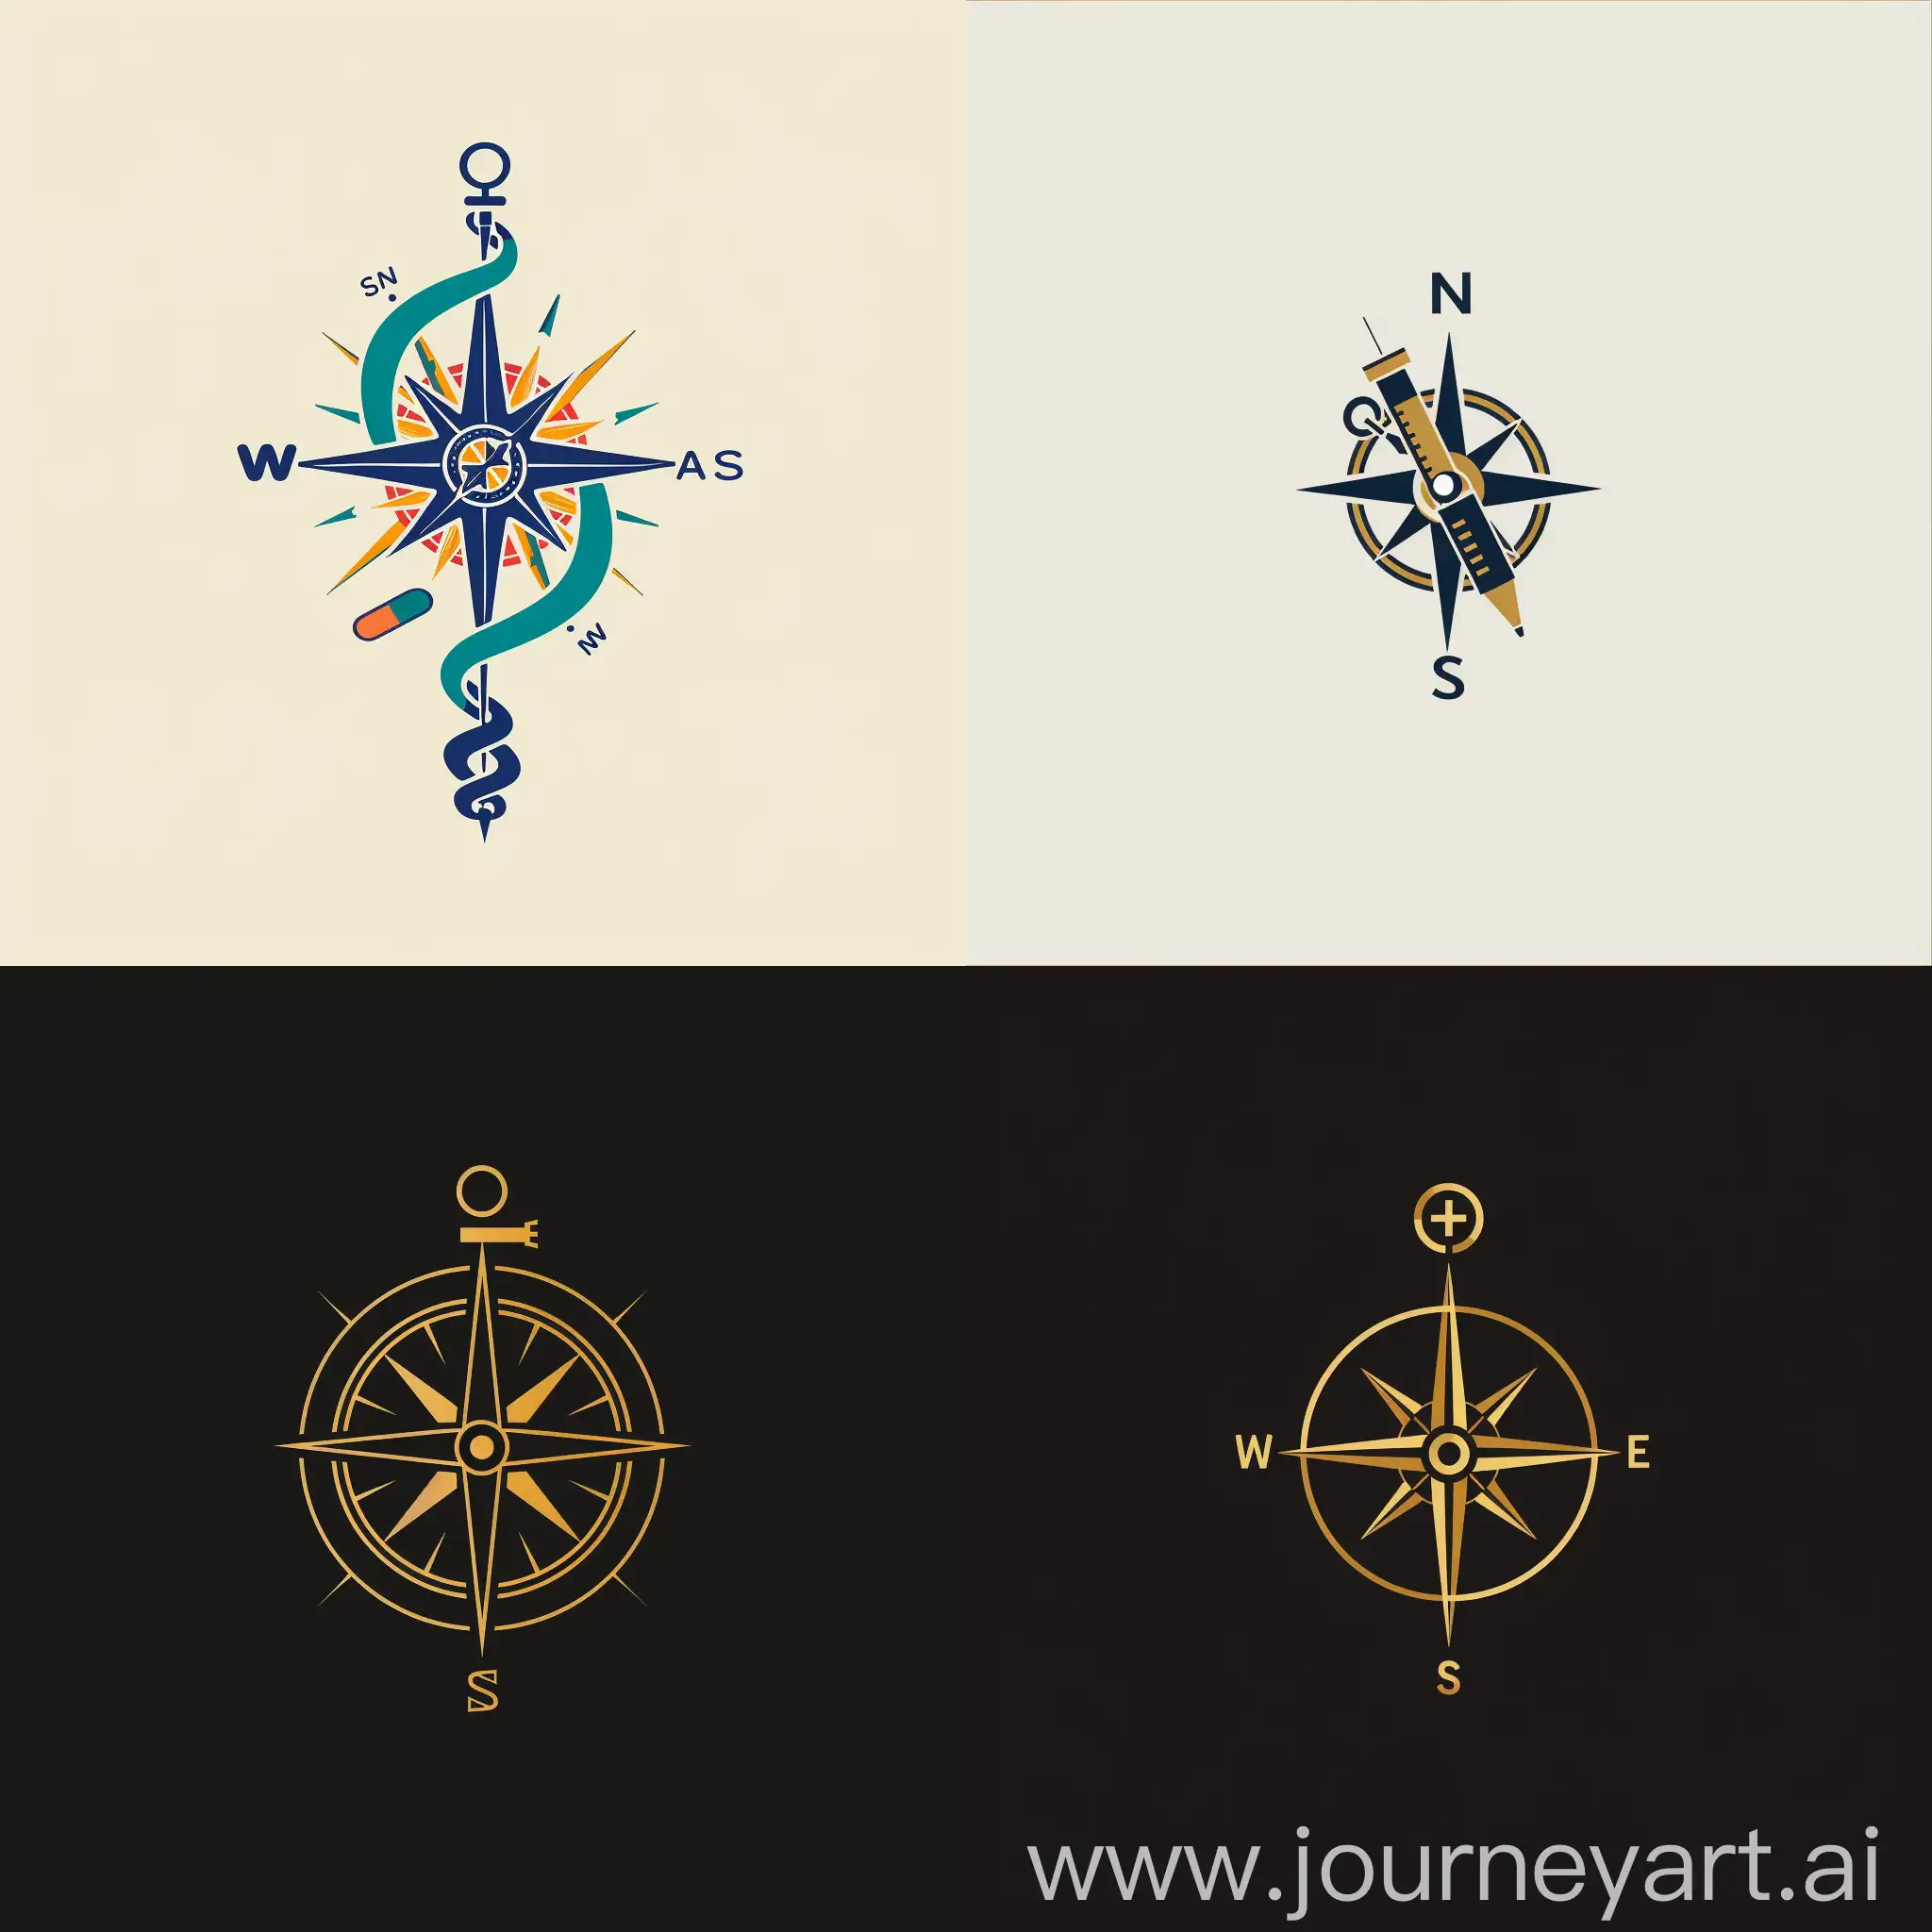 create a logo image of a very simple and memorable symbol of medicine and a compass connected harmoniously together